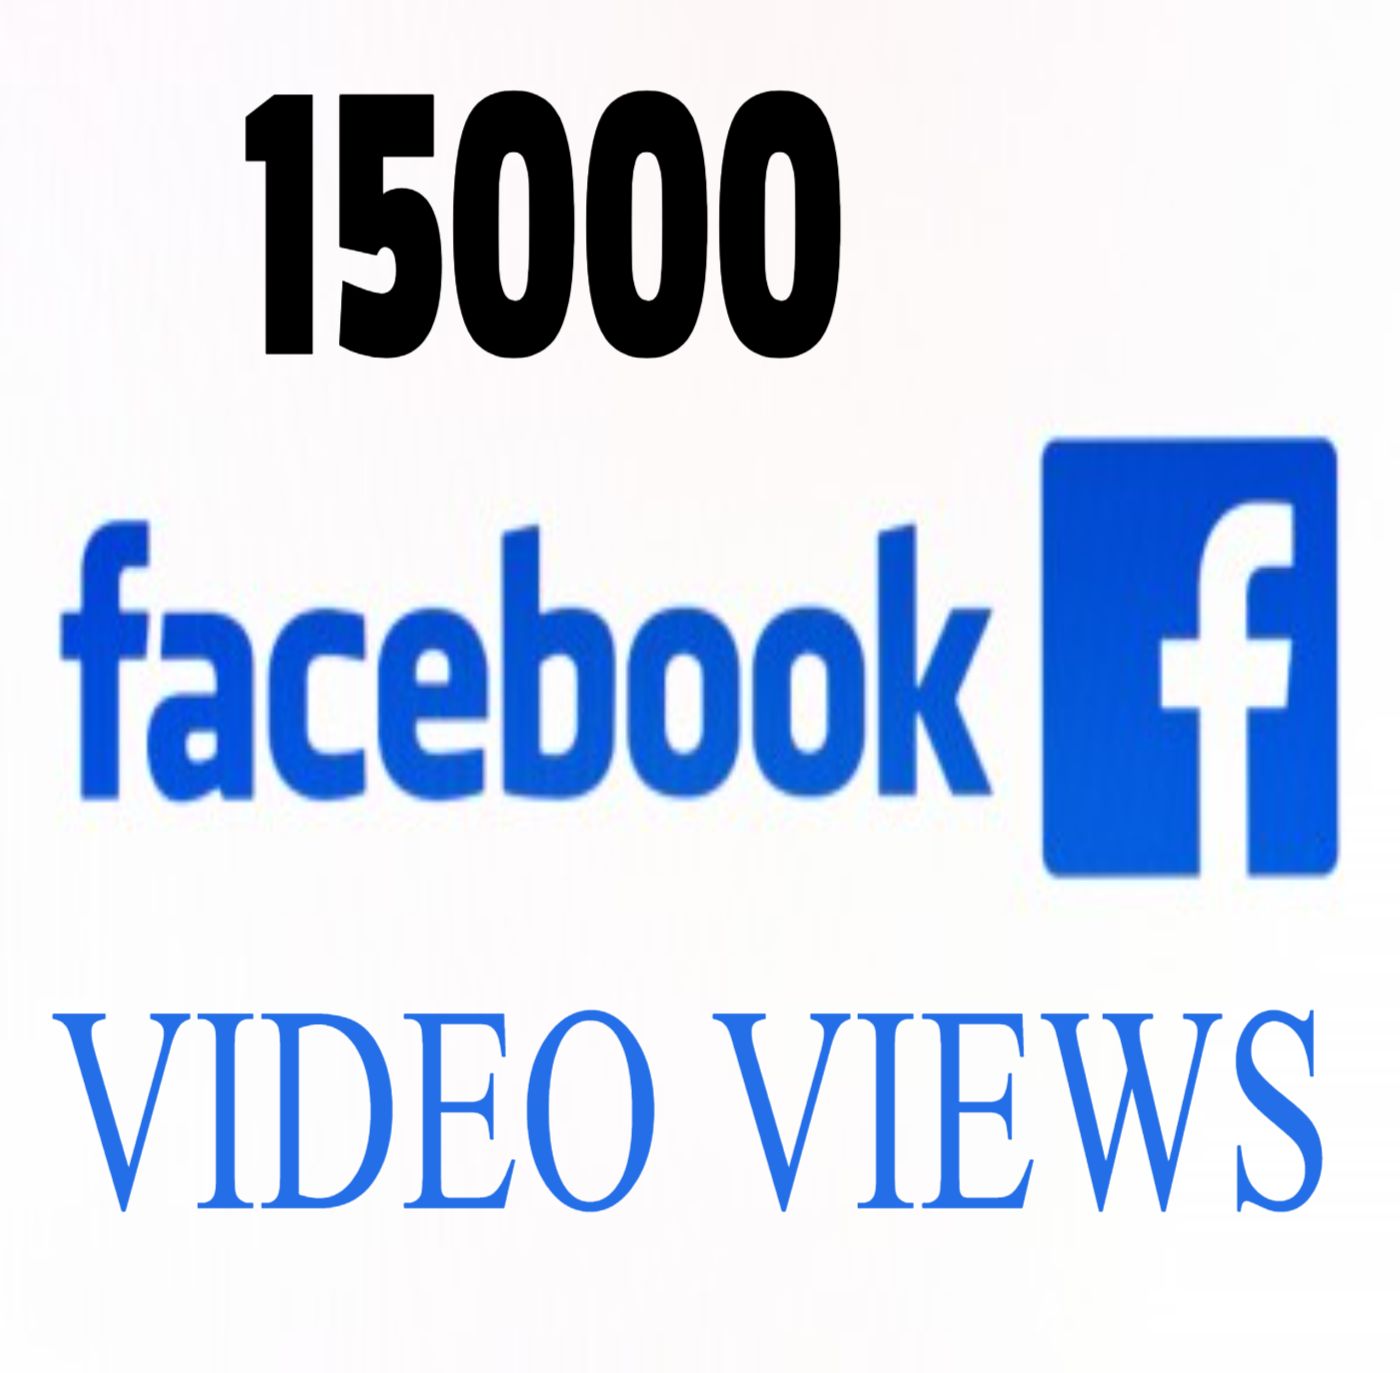 Add you 15000 views with 500 post likes